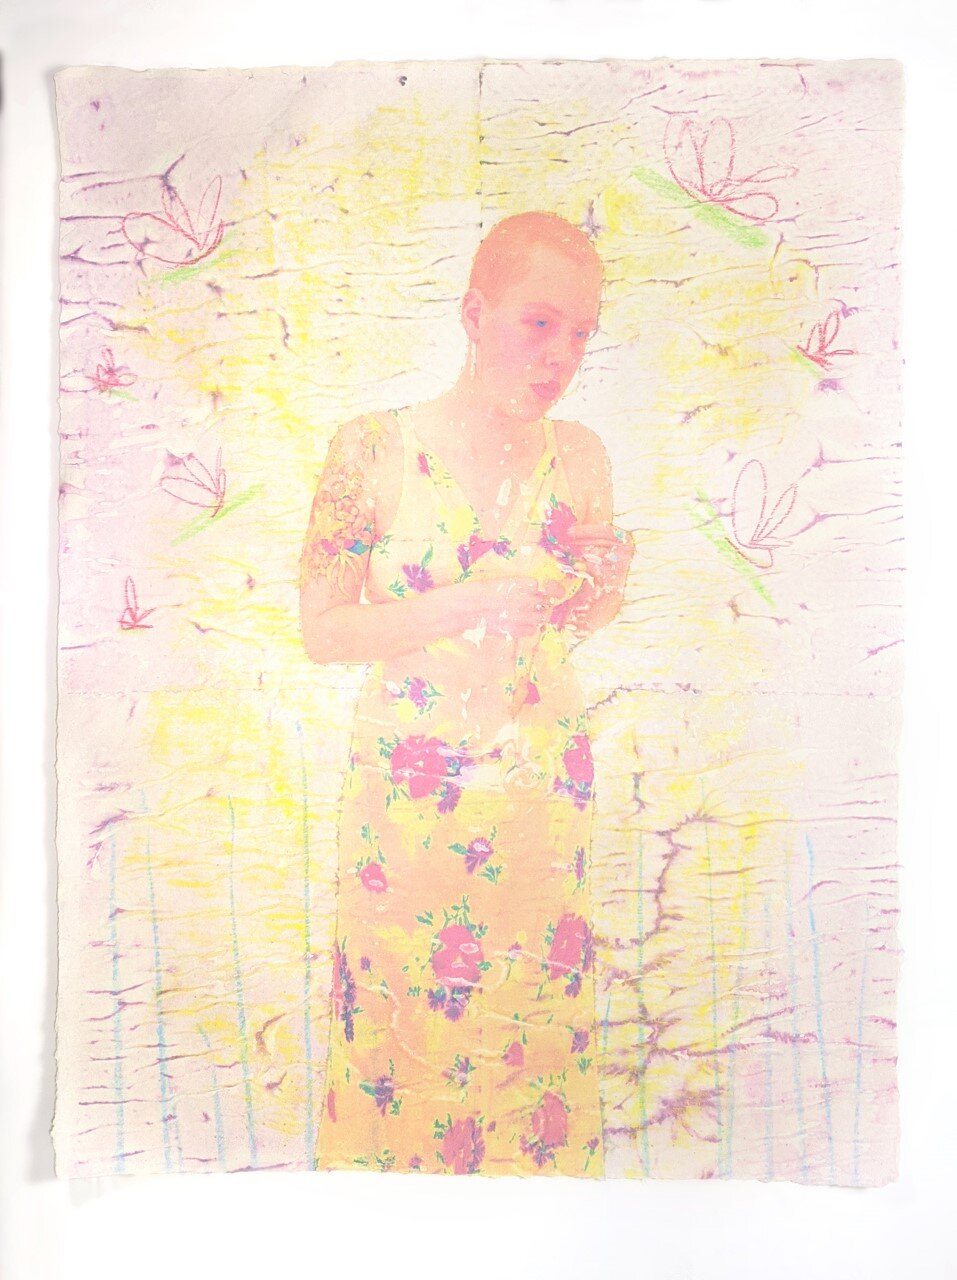  Kayla Story   Silence surrounding , 2020  From the series: All That is Solid Melts into Air  Handmade paper, digital image pressure transfer, watercolor  